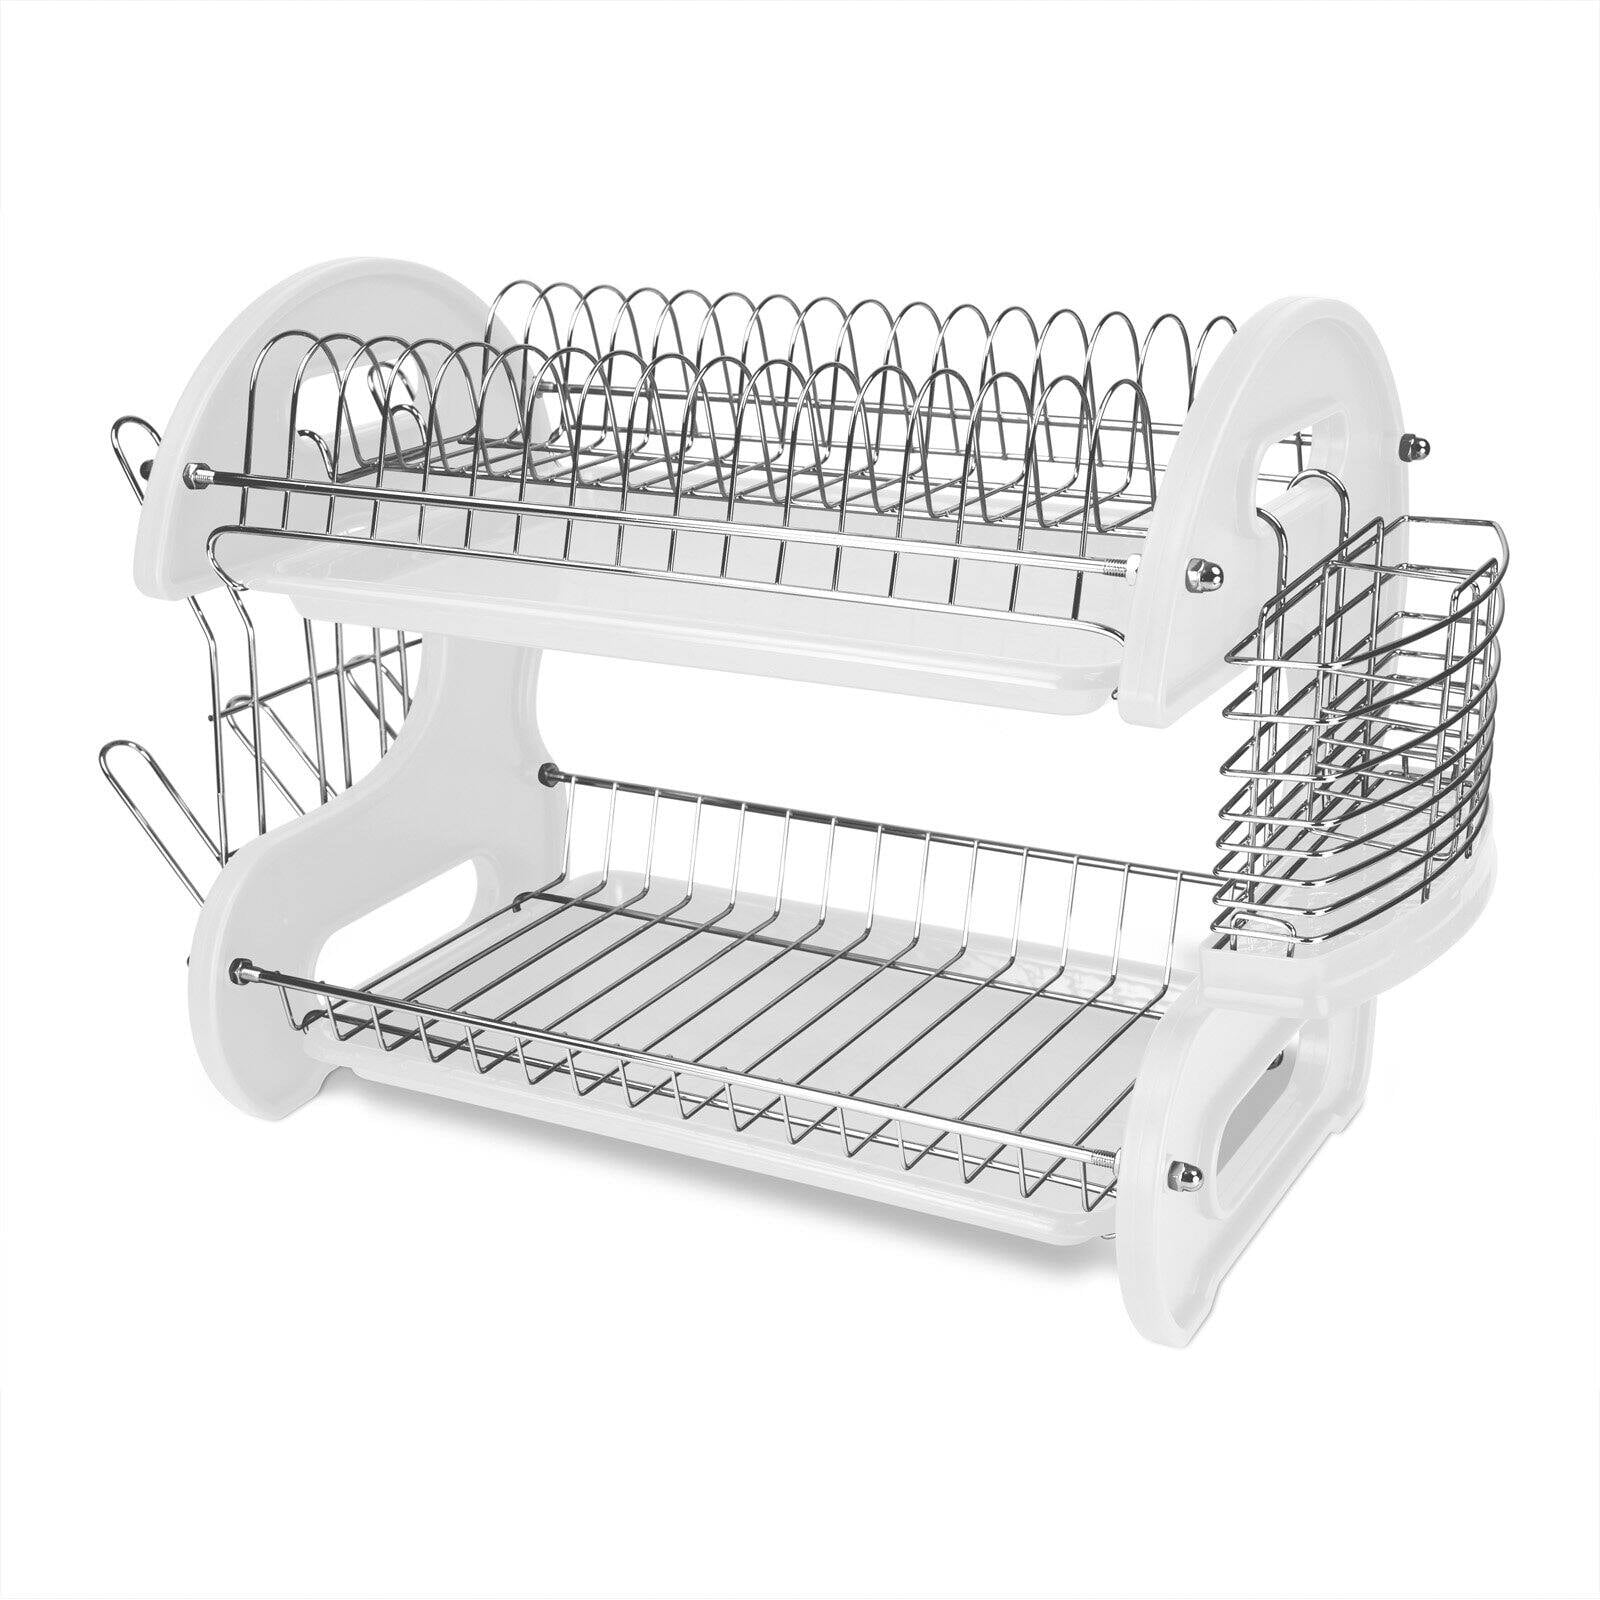 FurnitureXtra Stainless Steel Dish Drainer with Drip Tray and Cutlery Holder 2 Tier Green